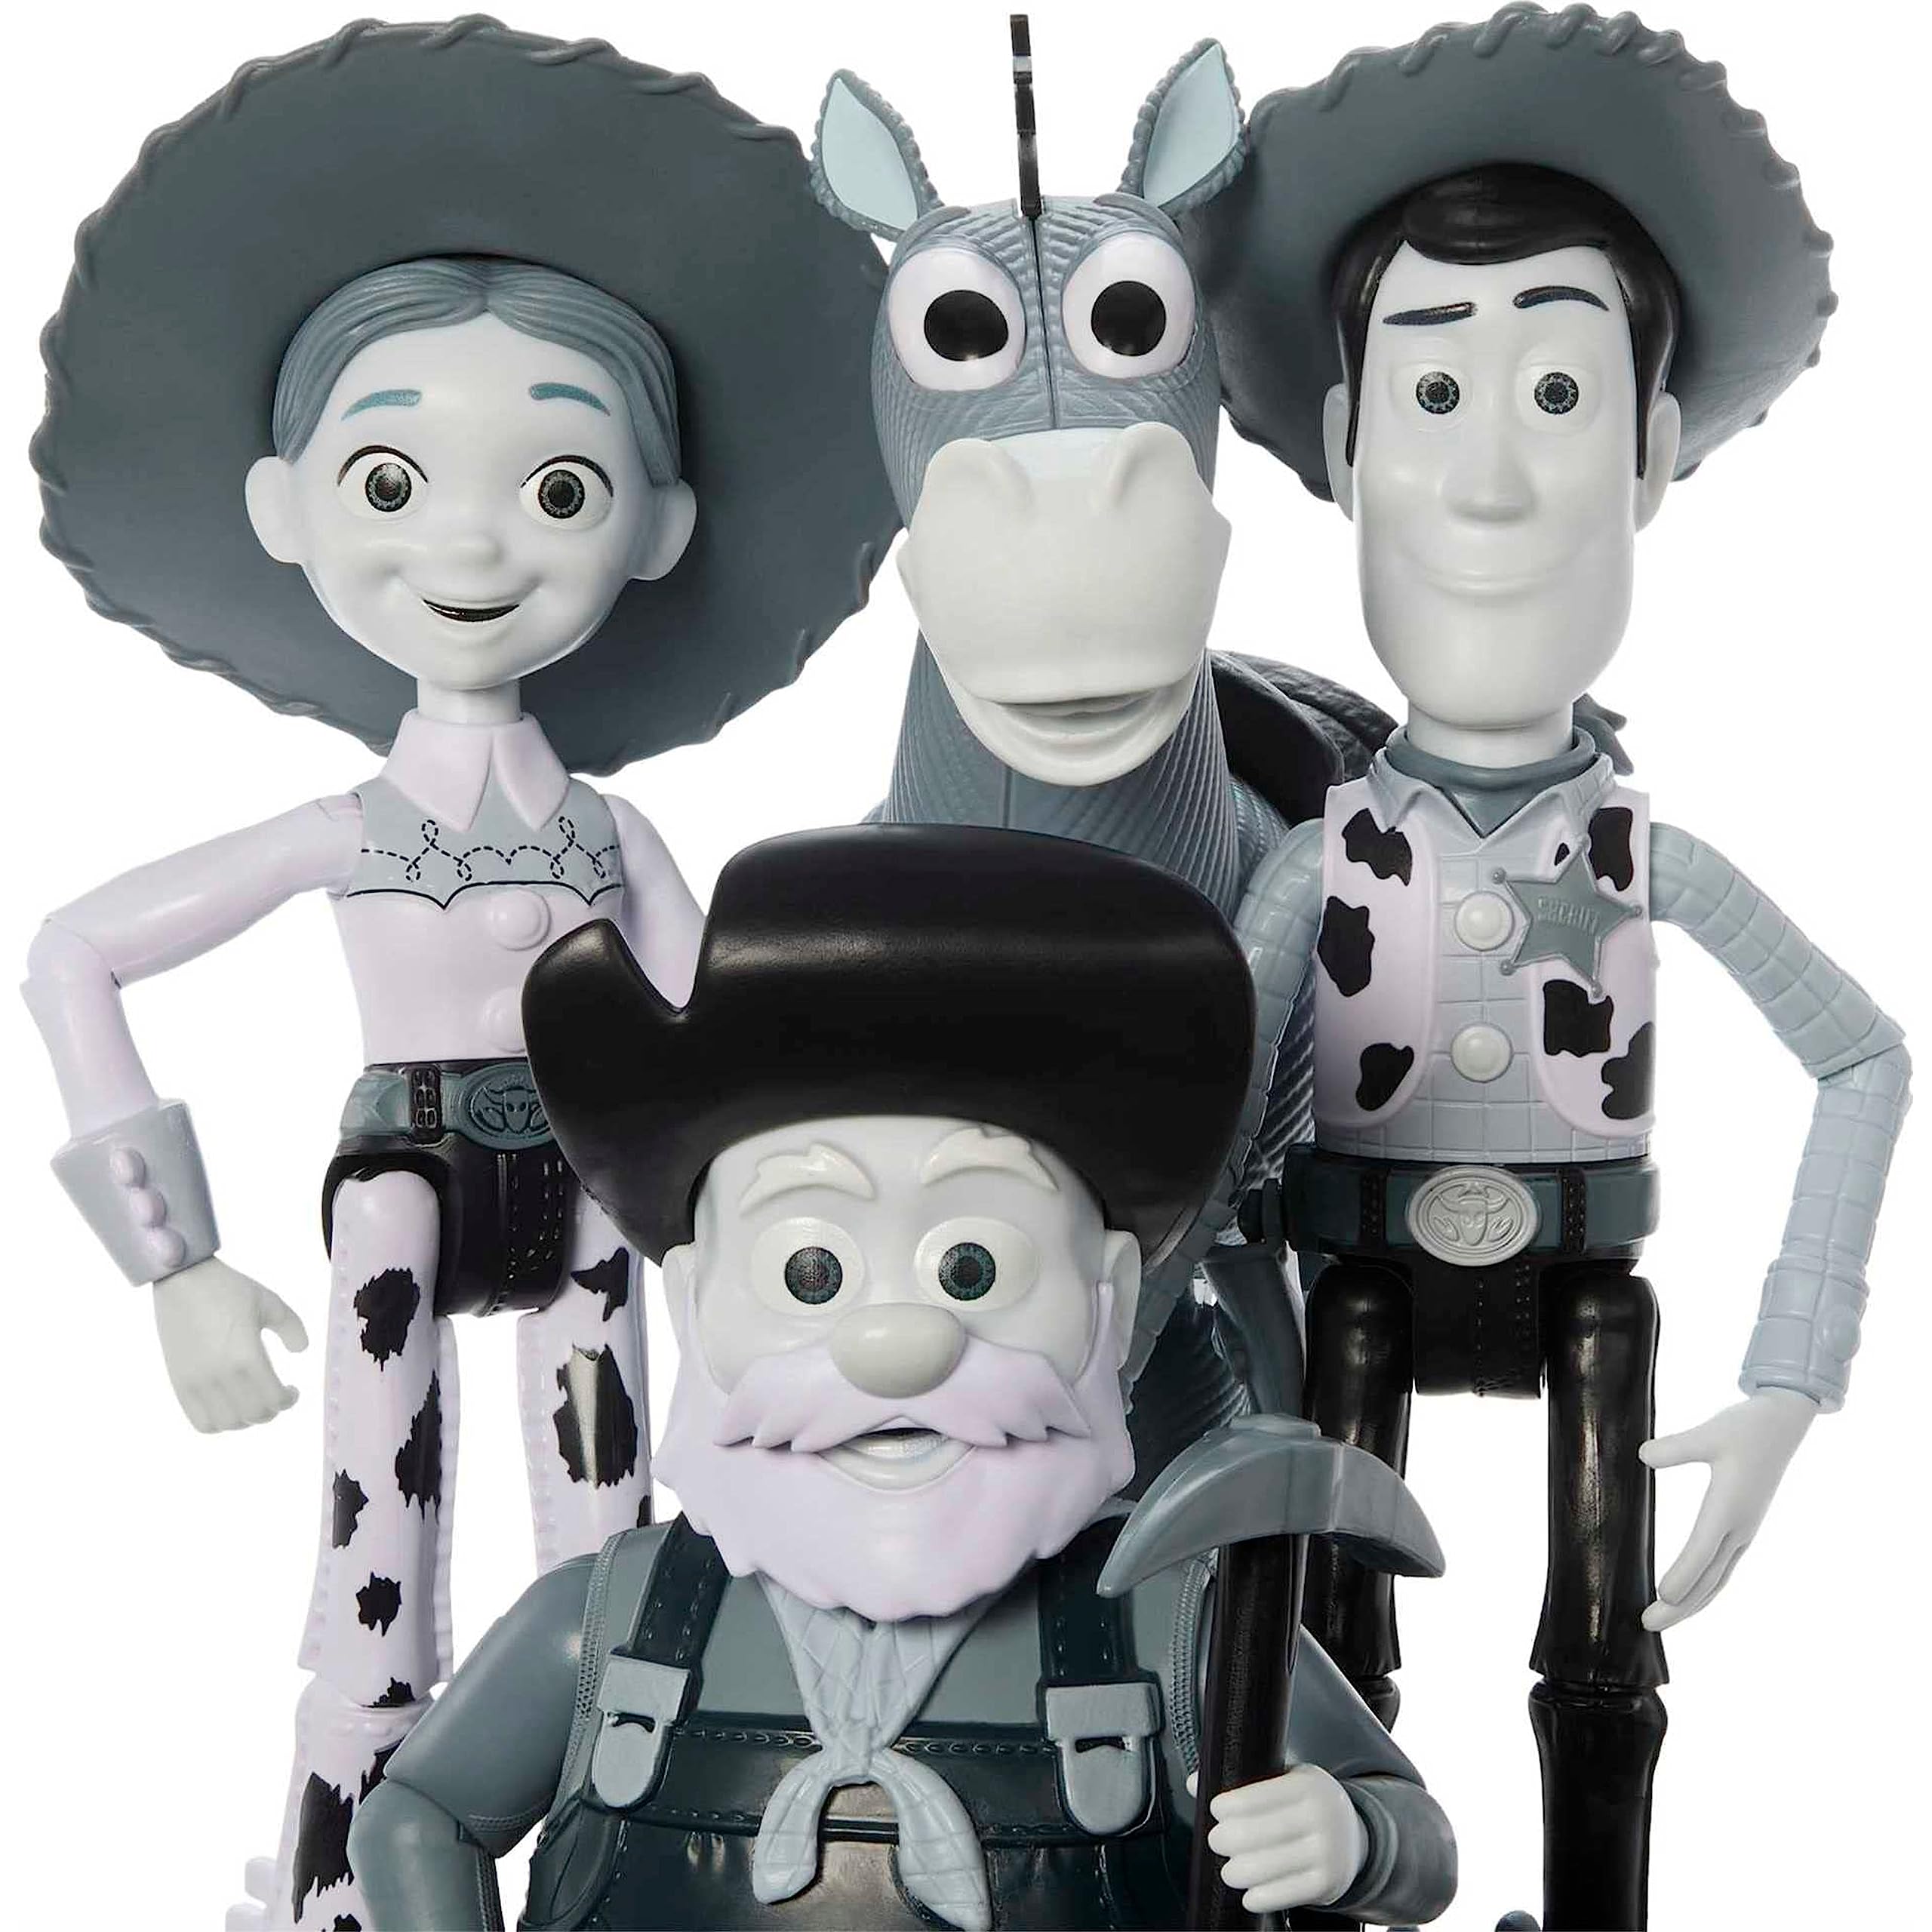 Disney and Pixar Toy Story Set of 4 Action Figures with Mon0Chromatic Woody, Jessie, Bullseye & Stinky Pete, Woody's Roundup, 7-in Scale (Amazon Exclusive)